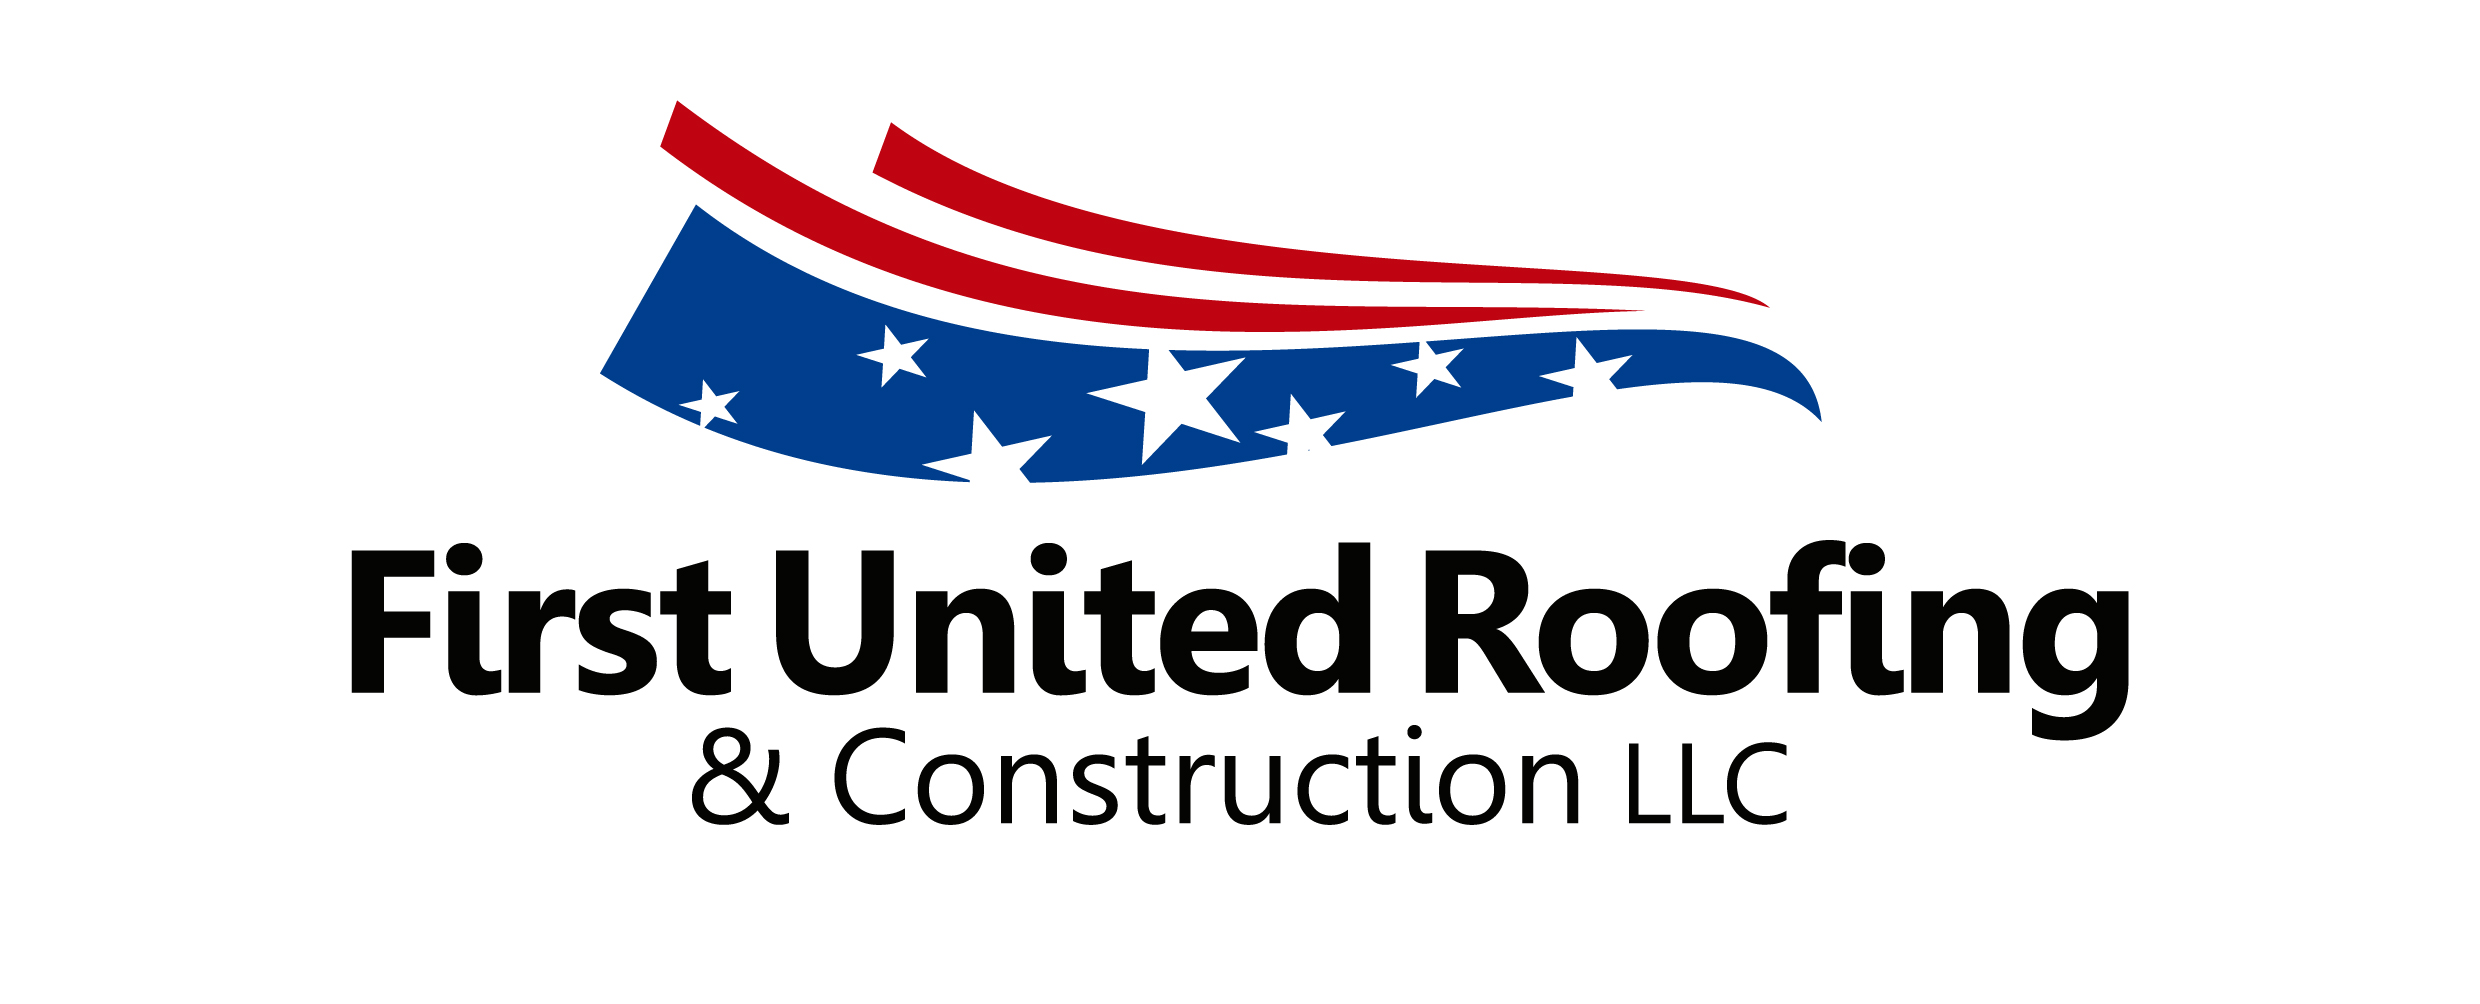 First United Roofing & Construction, LLC